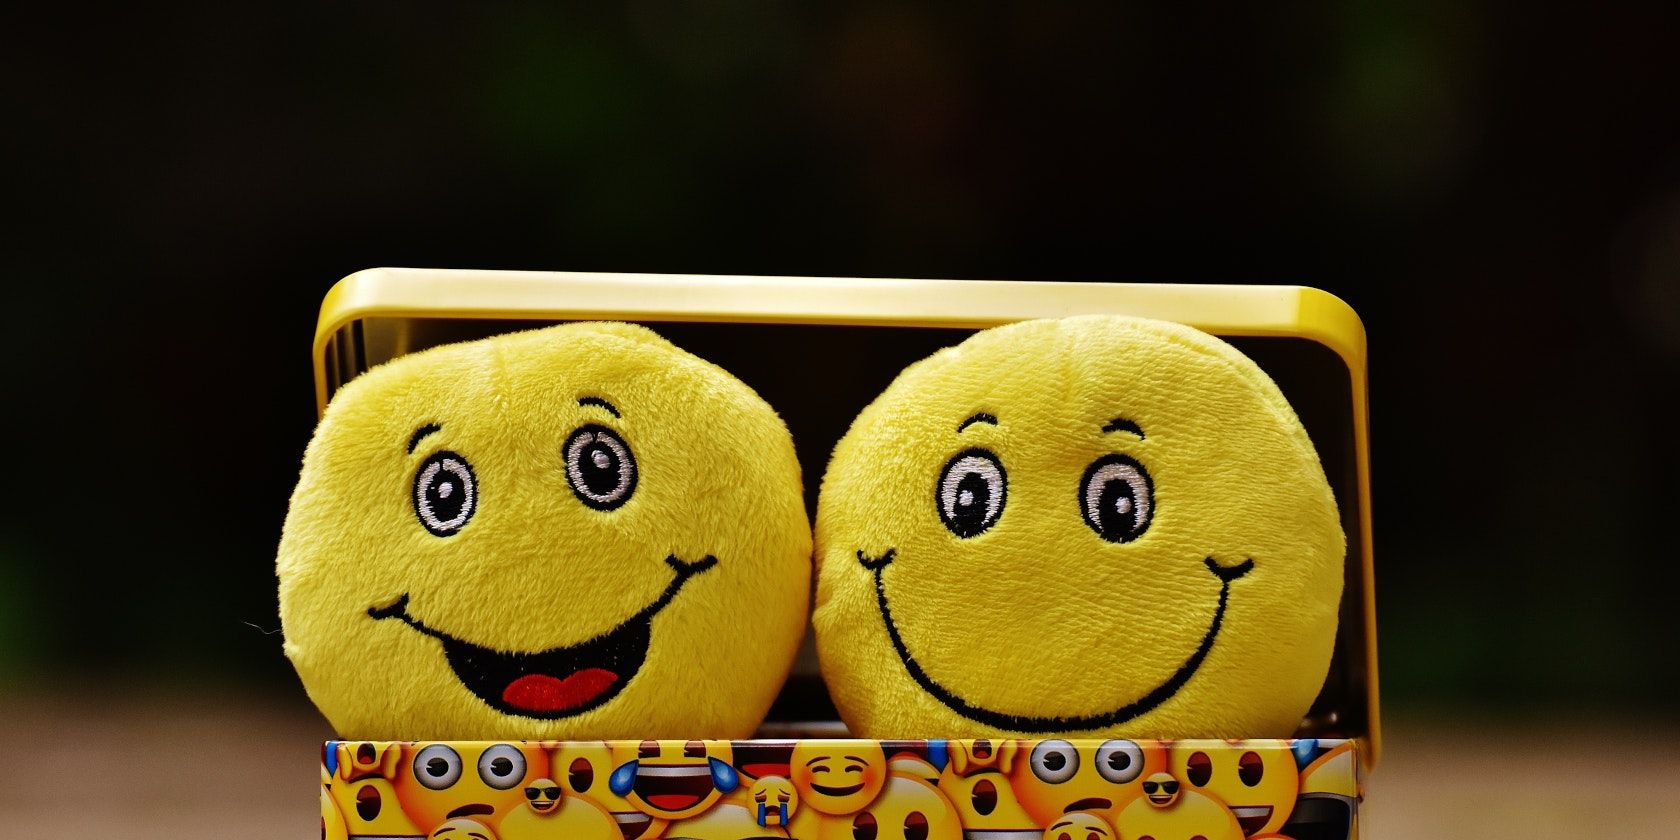 Plush happy faces in an open box